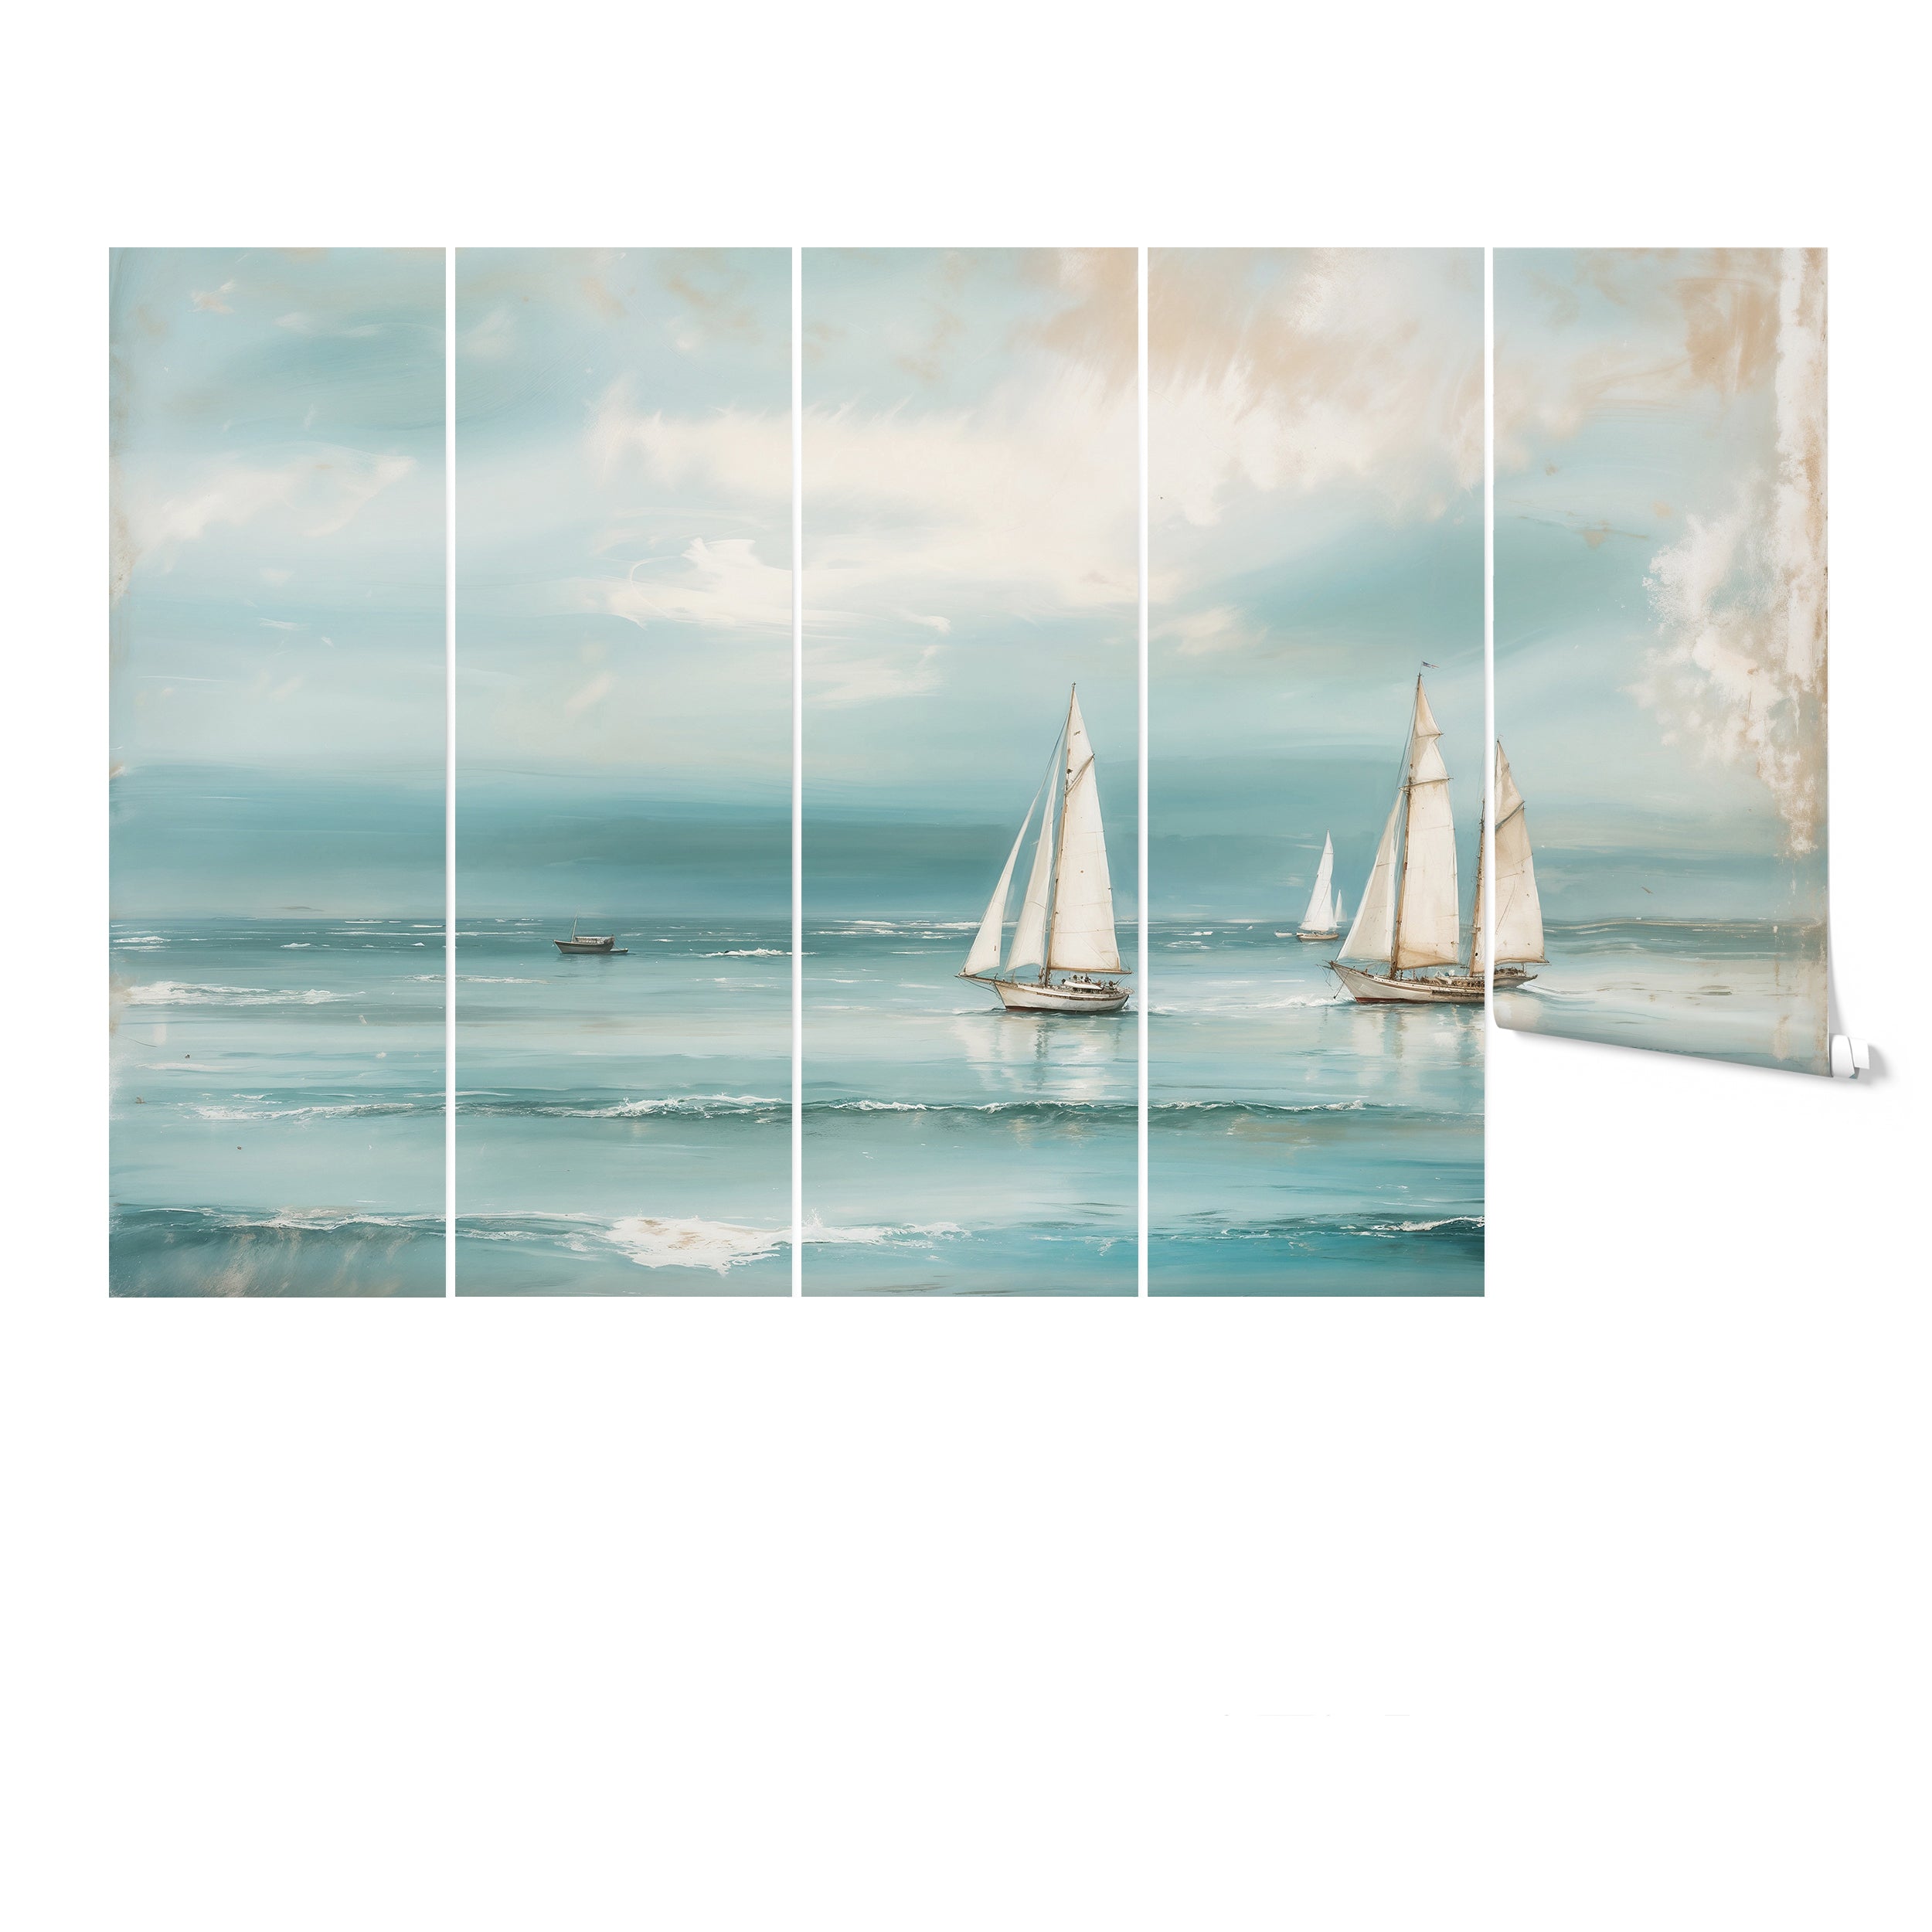 Close-up view of the Seaside Wallpaper Mural, beautifully capturing sailboats gliding on a soft blue sea under a serene sky. This detailed view highlights the mural’s ability to add a dynamic and peaceful element to any space.